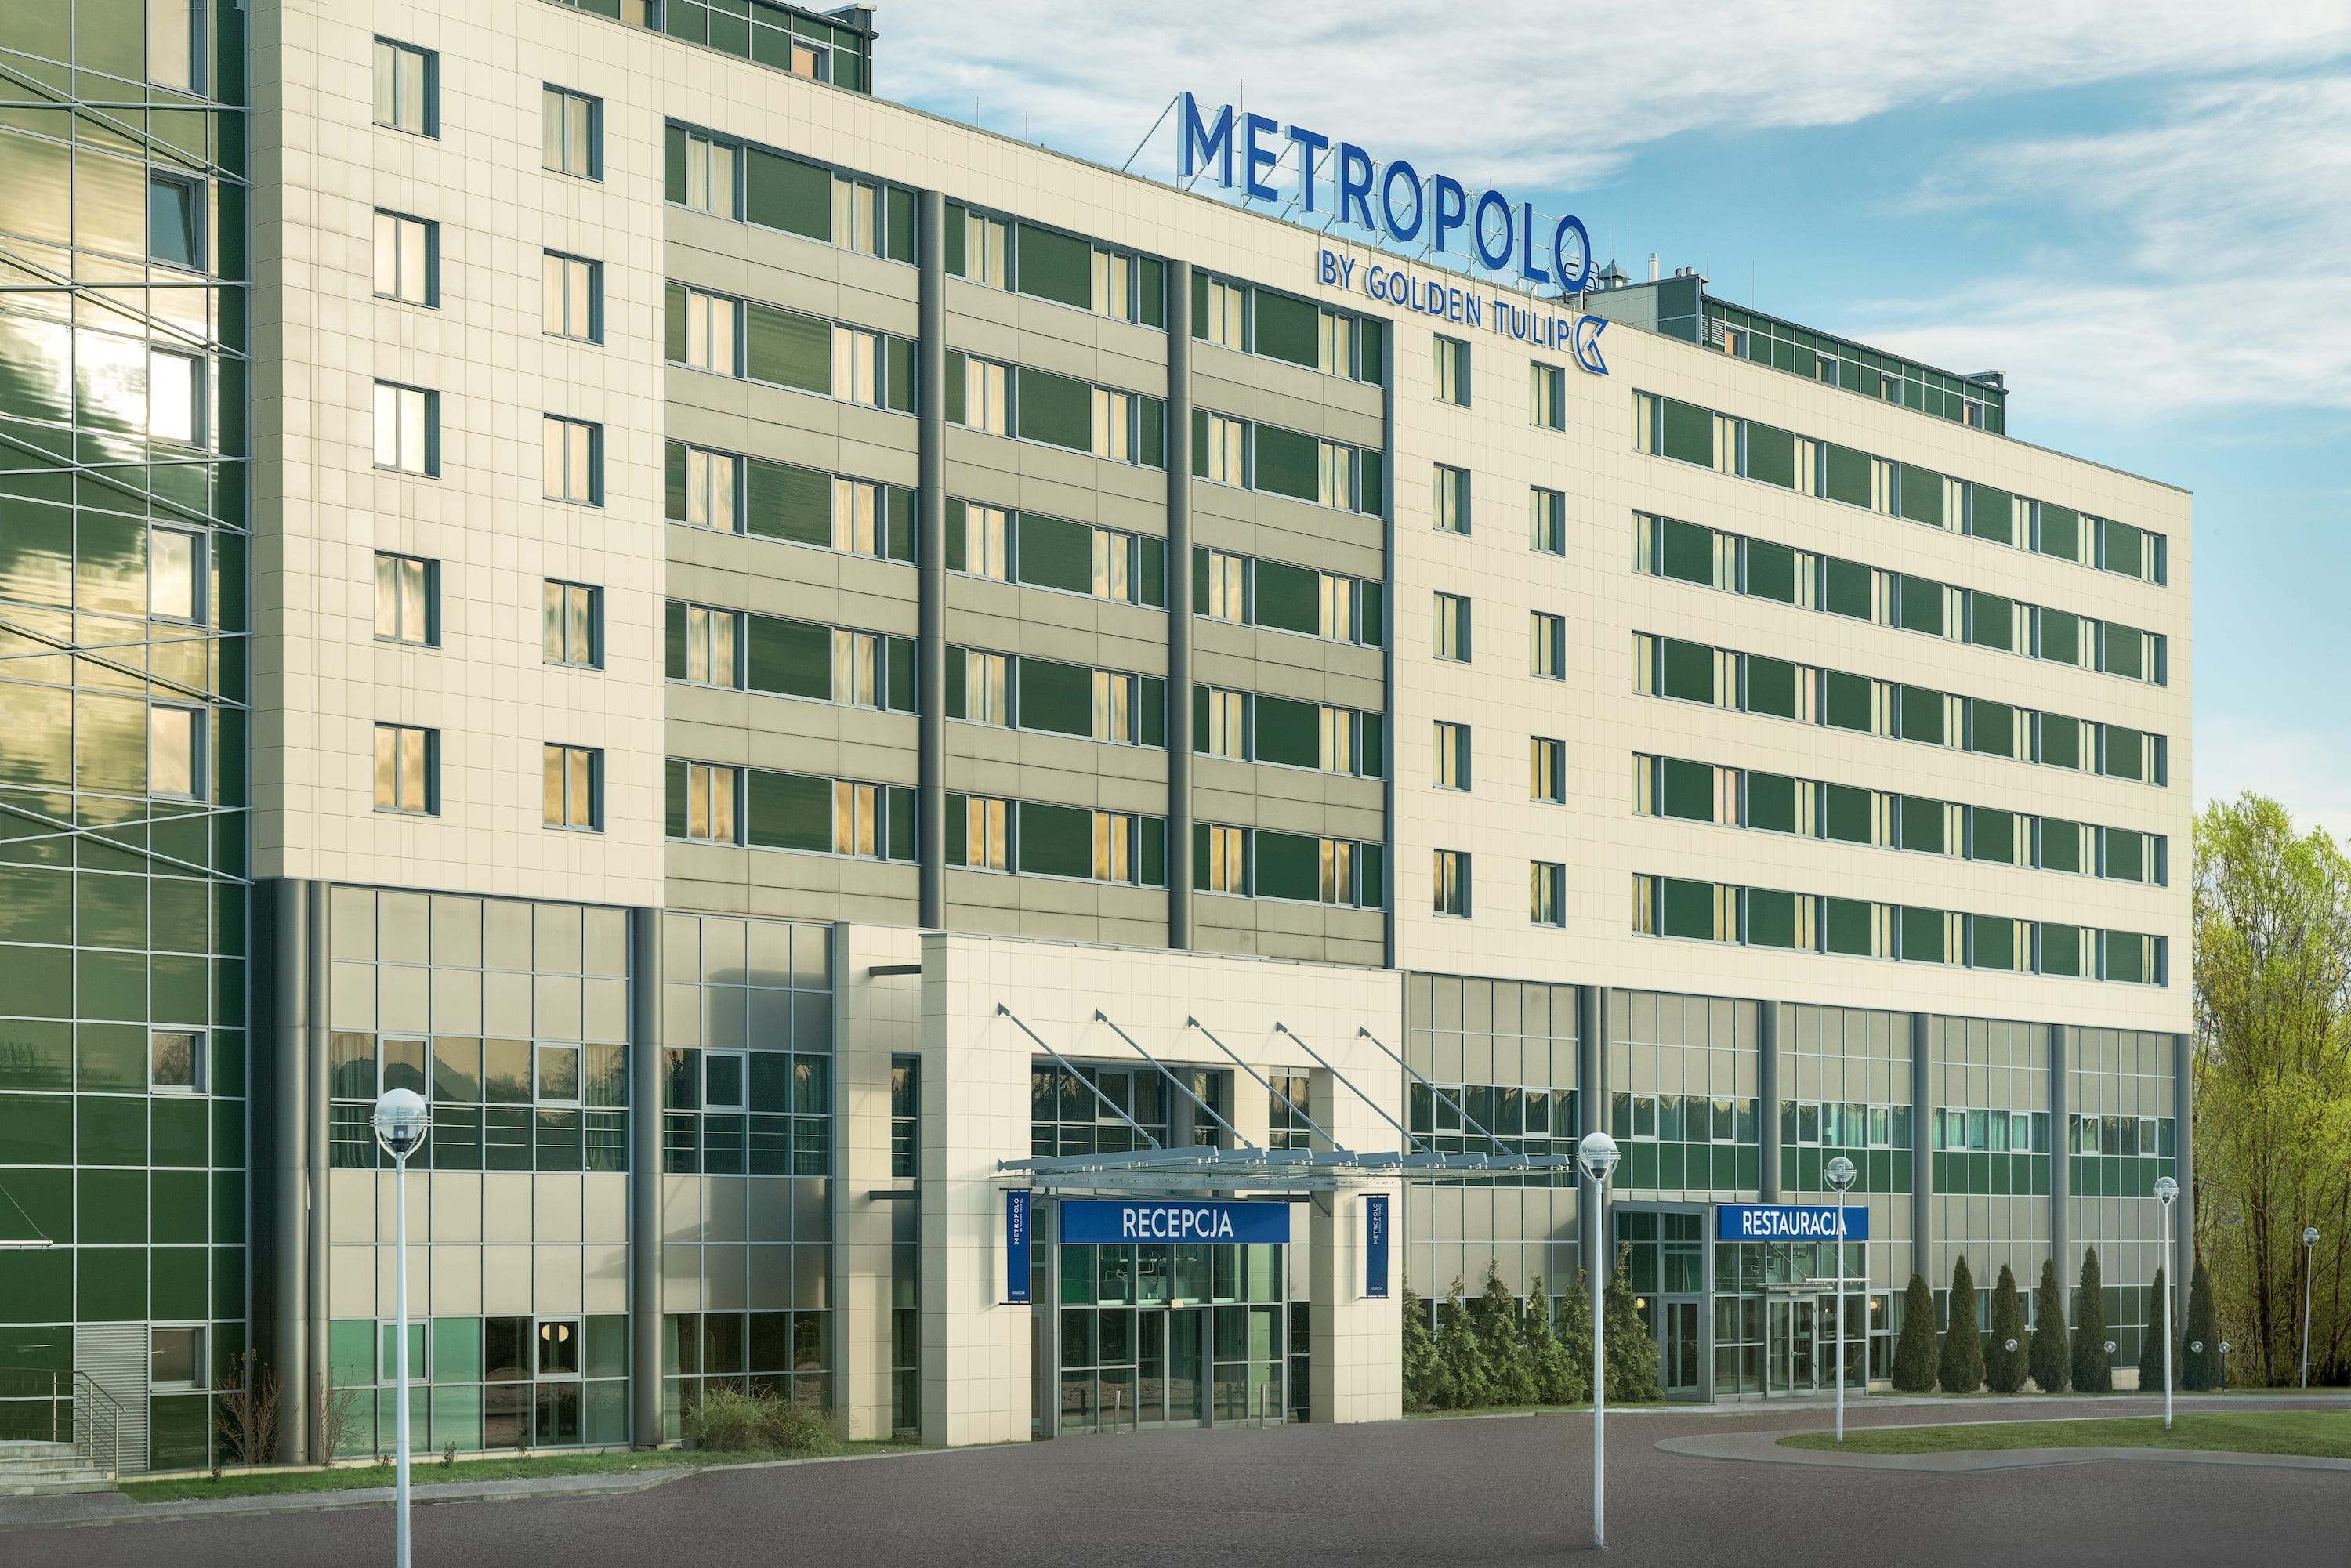 Negotiation of Management Agreement for the first Metropolo (LHG) hotel in Europe